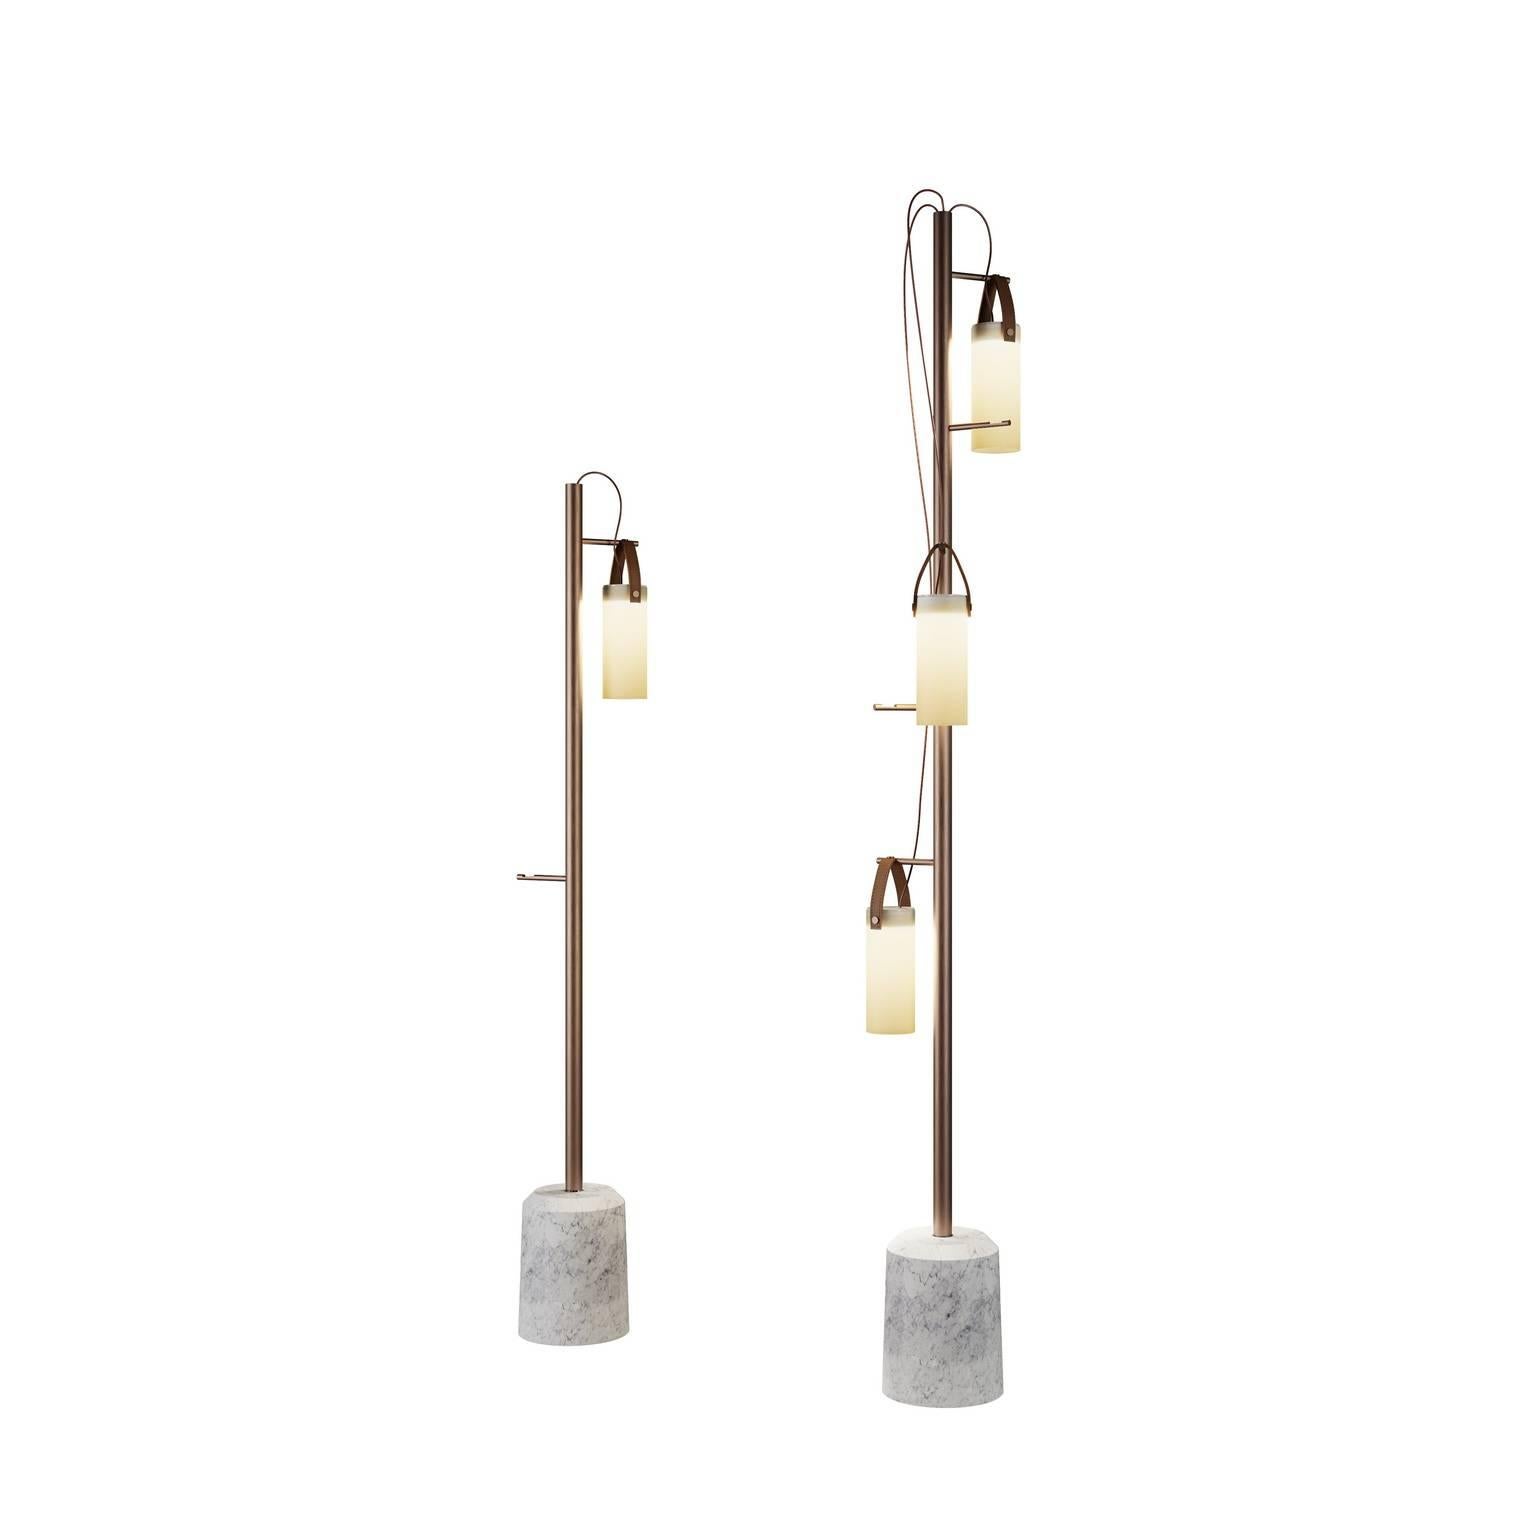 "Galerie" Low Floor Lamp Designed by Federico Peri for Fontana Arte For Sale